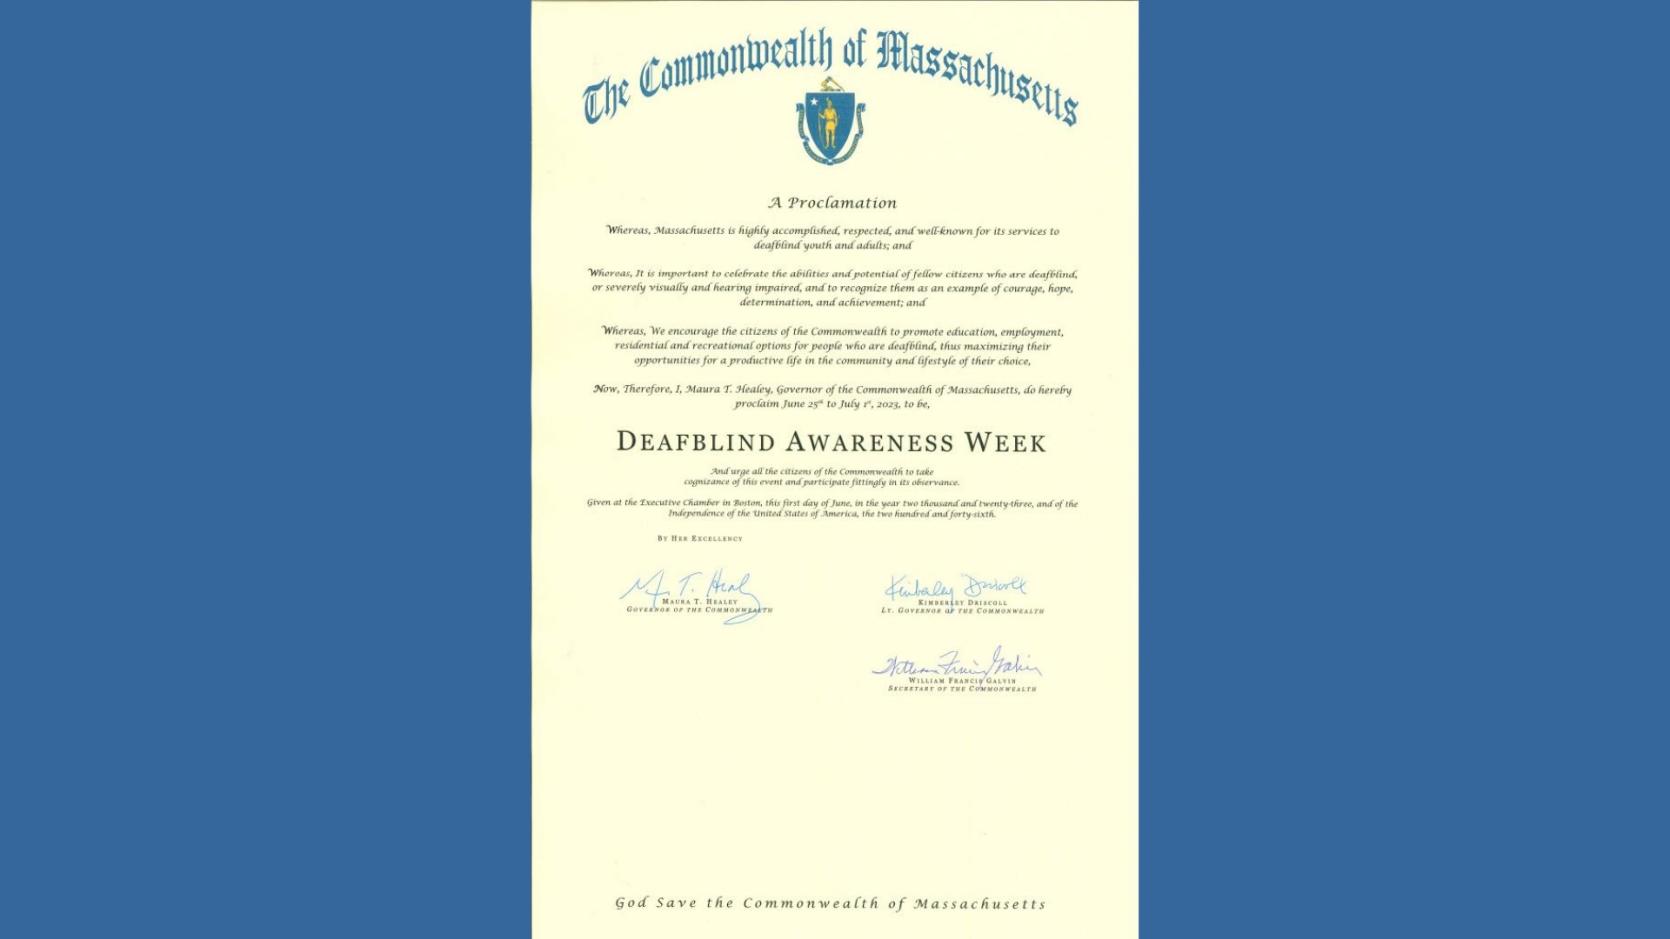 A photo of the DeafBlind Awareness Week Proclamation signed by Governor Healey, Lt. Governor Driscoll, and Secretary of the Commonwealth Galvin 